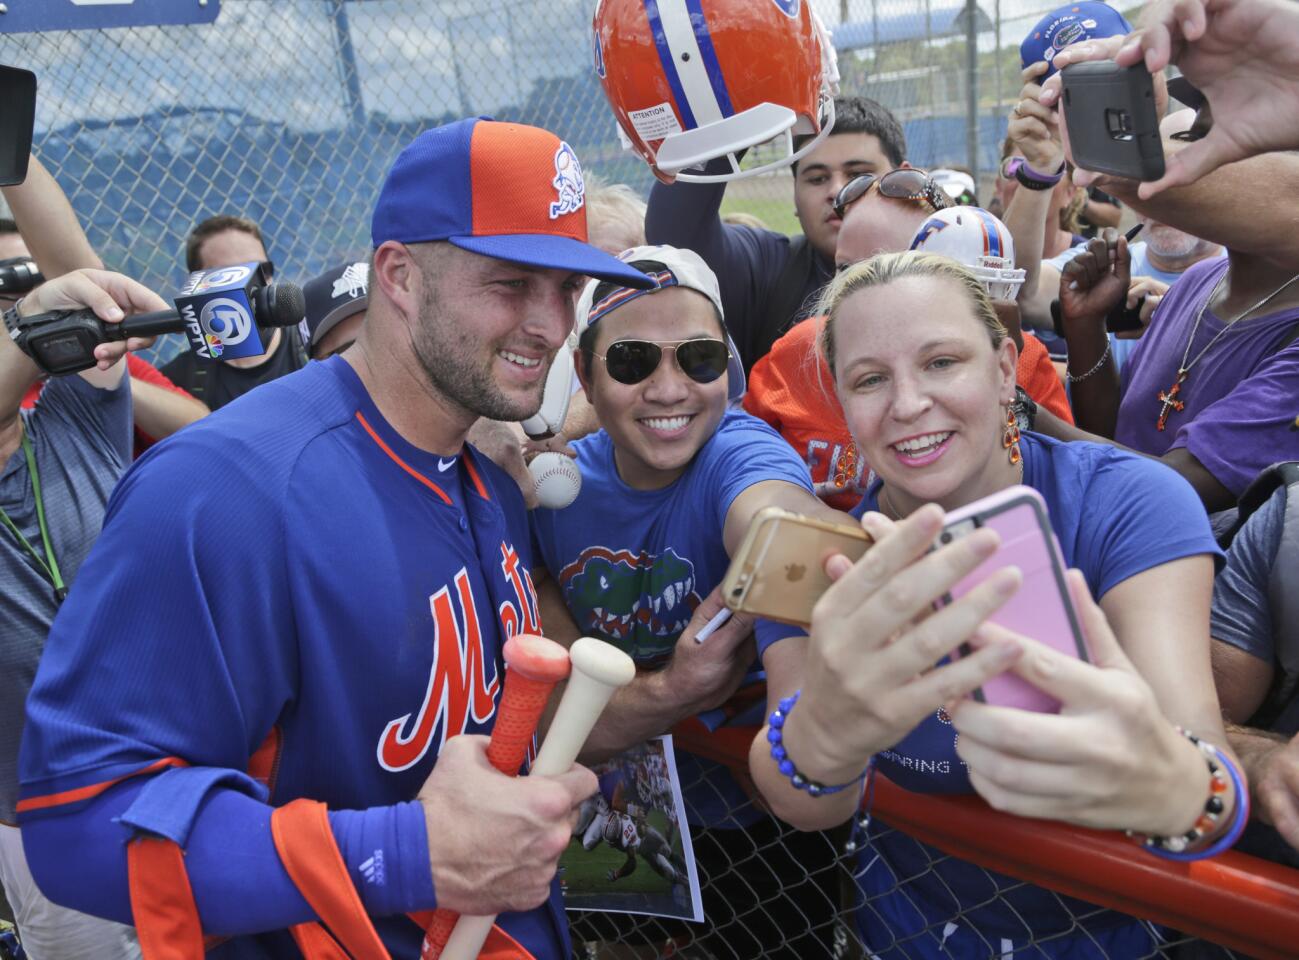 Tim Tebow takes a selfie with fans at the New York Mets' complex, Monday, Sept. 19, 2016, in Port St. Lucie, Fla. The 2007 Heisman Trophy winner and former NFL quarterback got to the complex early Monday, and started his first workout as part of their instructional league team. (AP Photo/Wilfredo Lee)